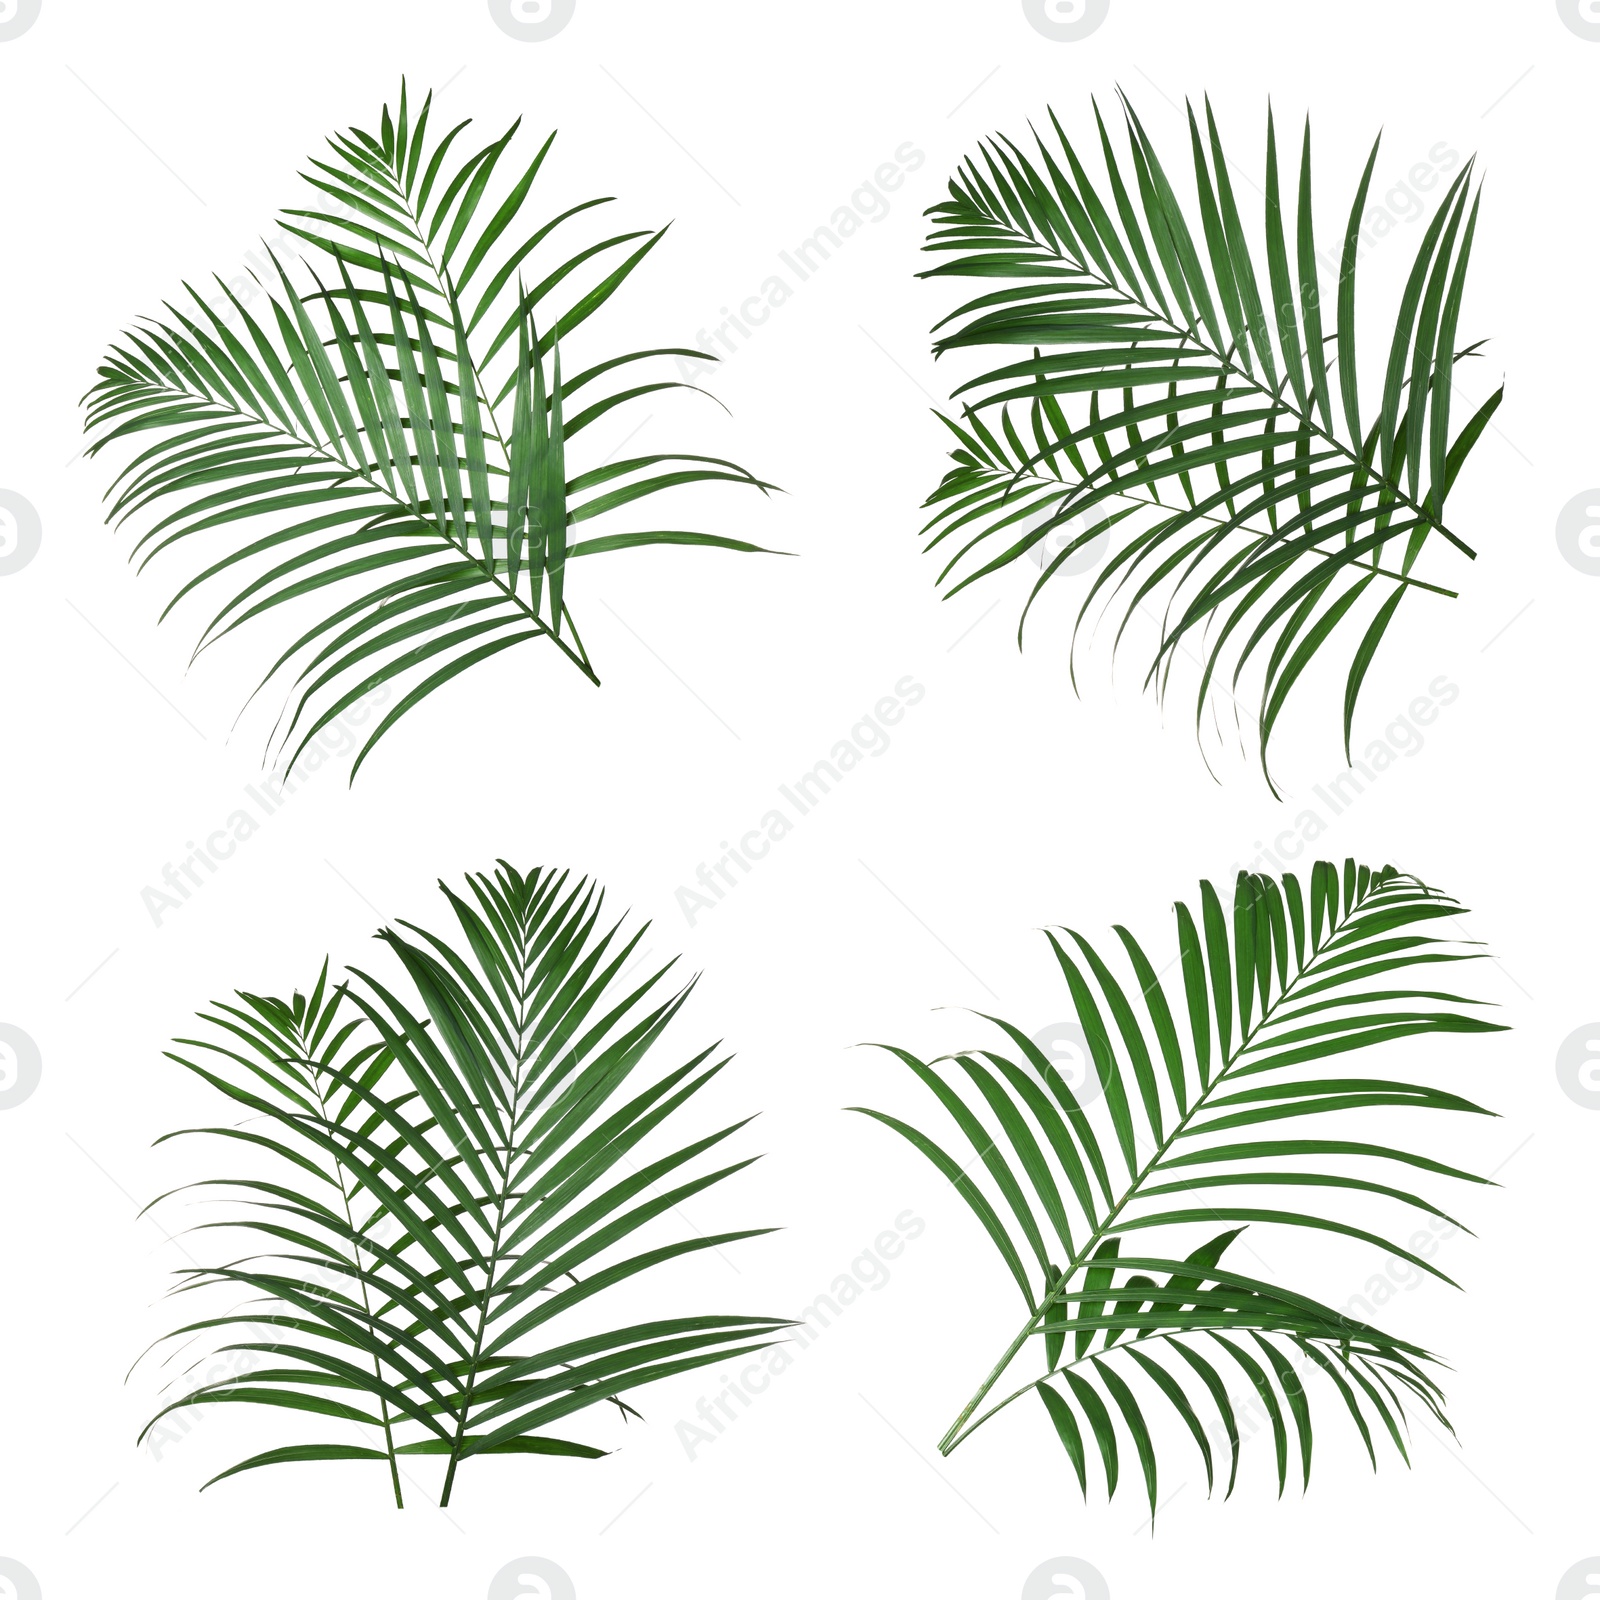 Image of Set with lush tropical leaves on white background